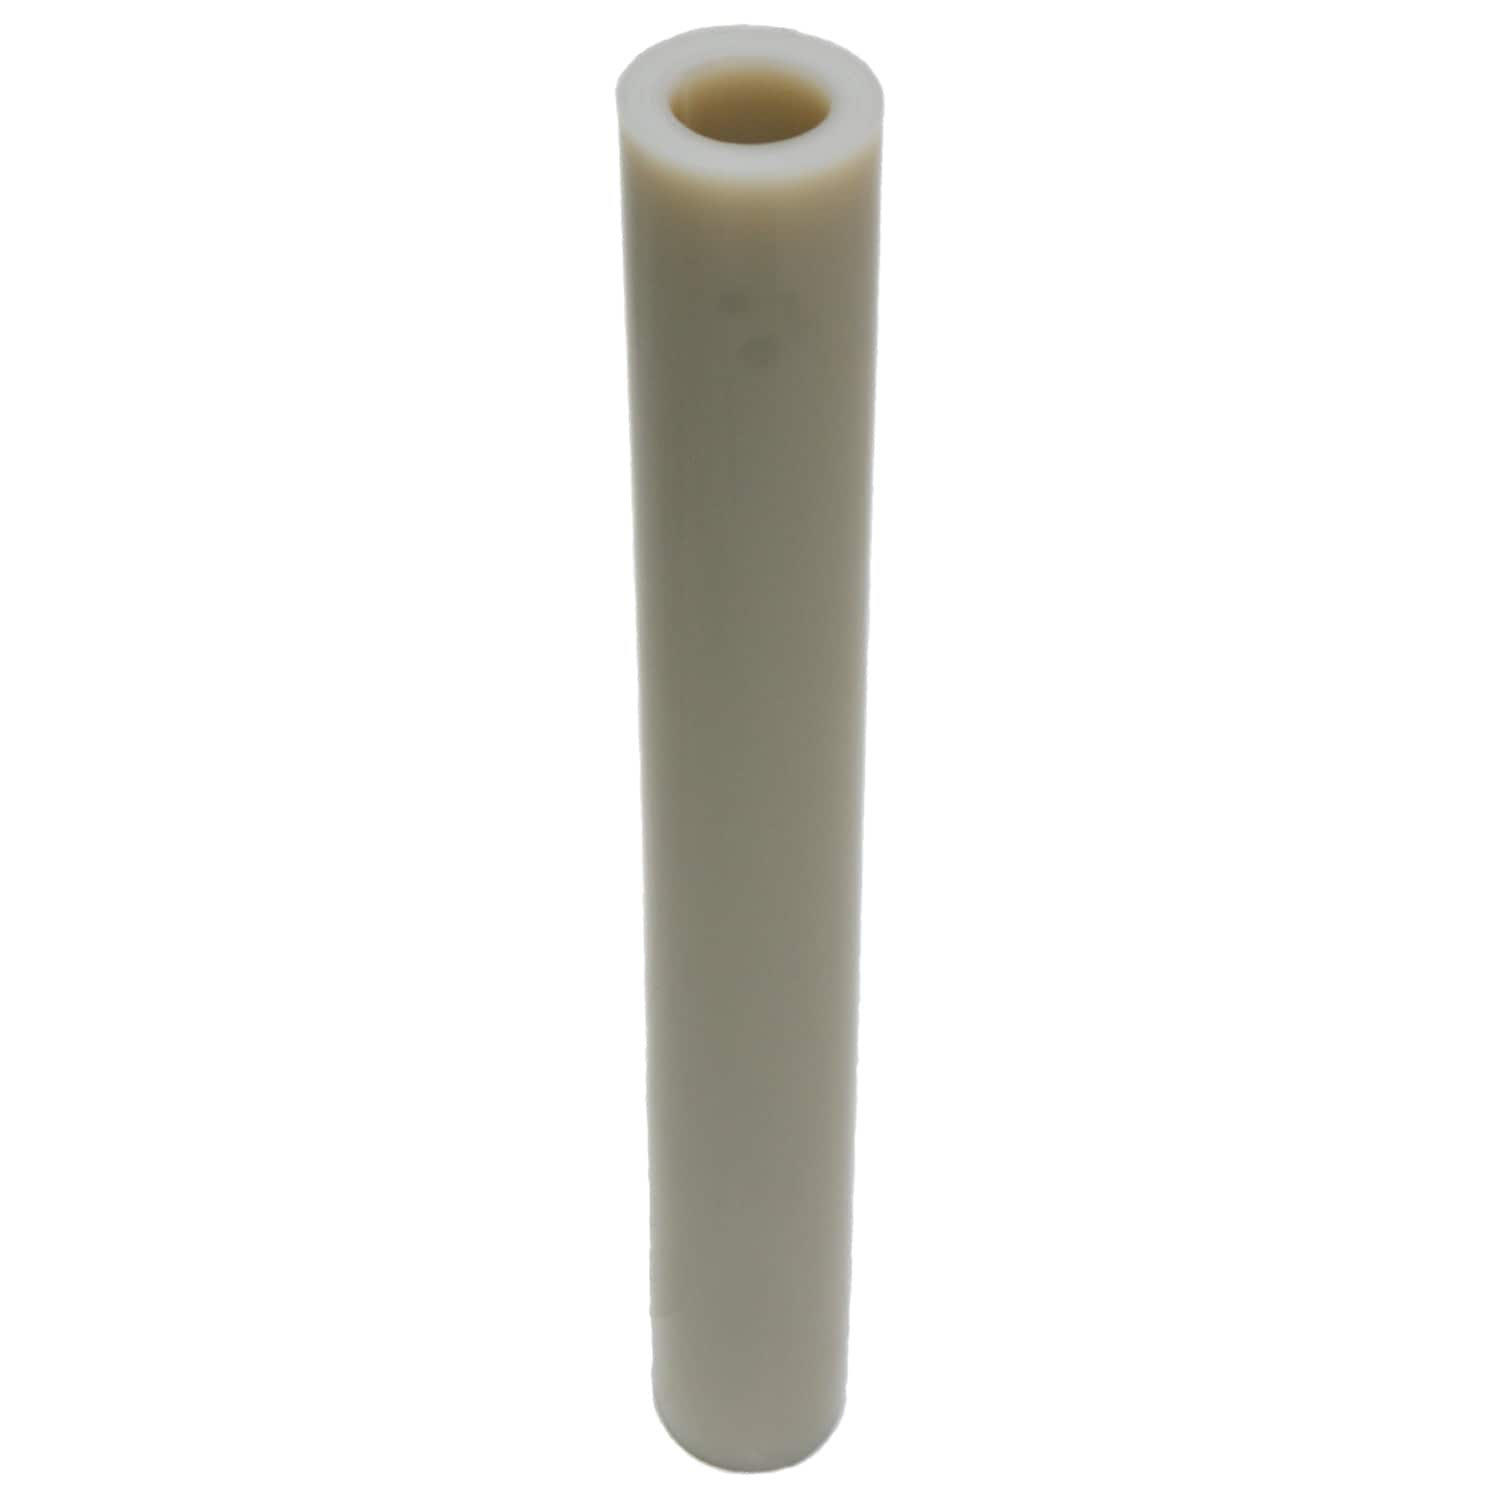 Rubber-Cal Silicone 1/4 in. x 36 in. x 12 in. Translucent